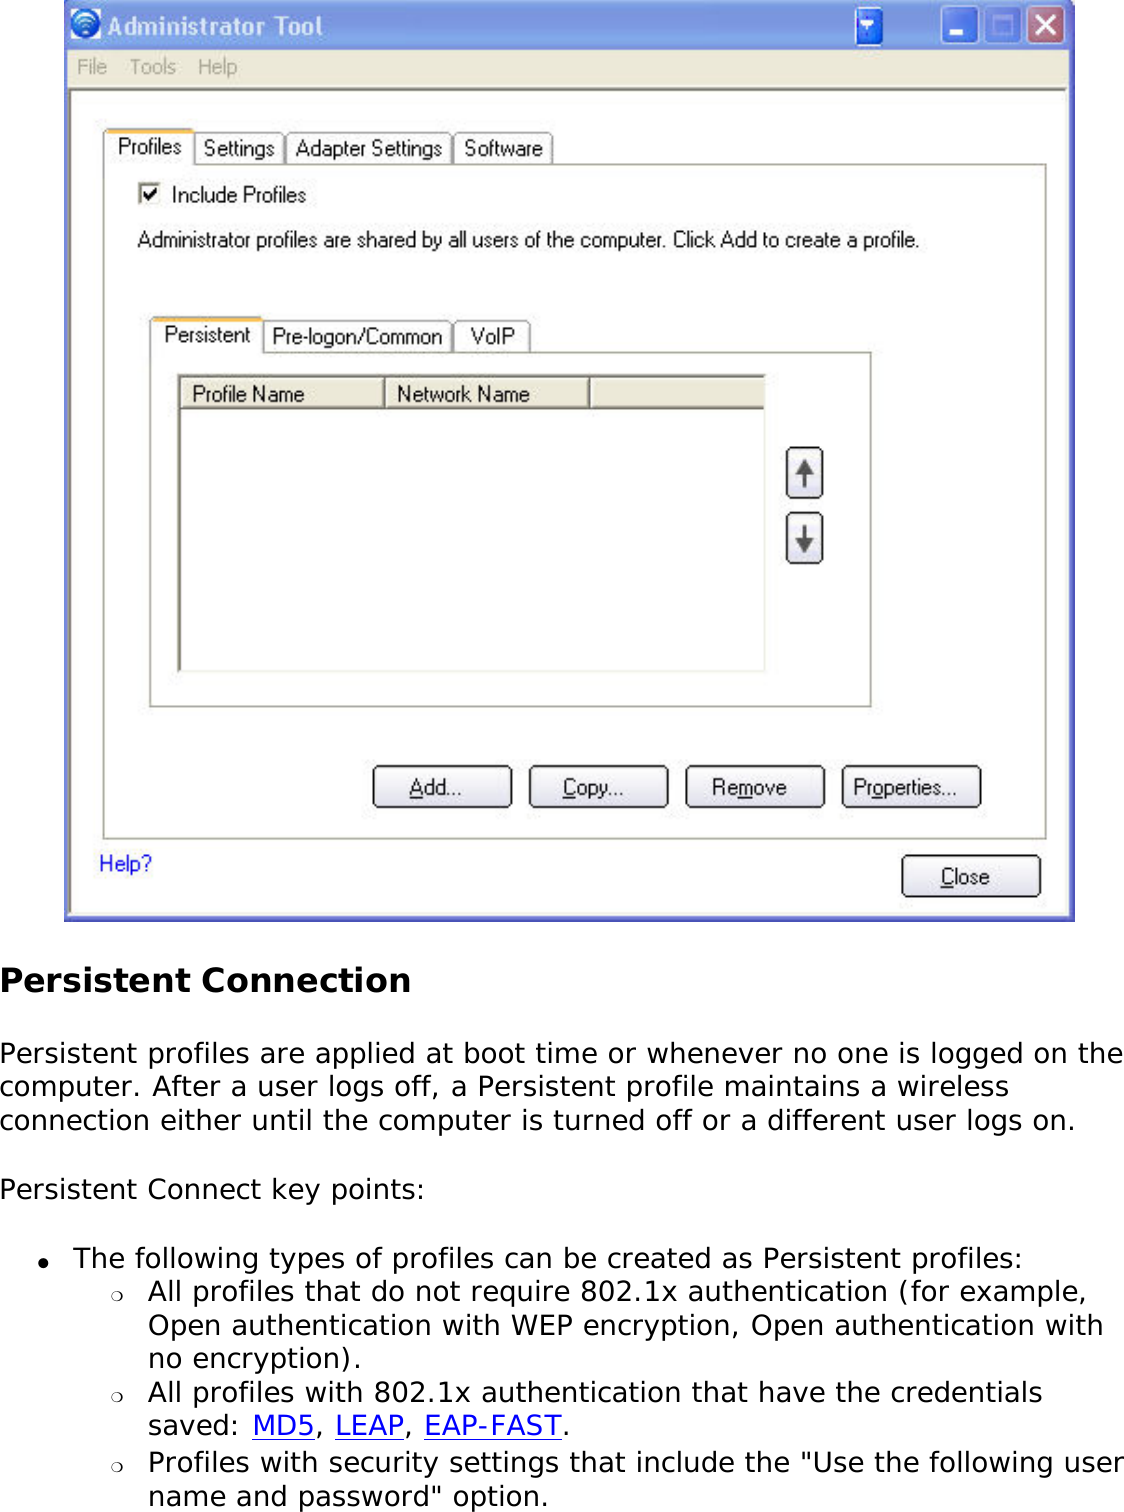  Persistent Connection Persistent profiles are applied at boot time or whenever no one is logged on the computer. After a user logs off, a Persistent profile maintains a wireless connection either until the computer is turned off or a different user logs on. Persistent Connect key points: ●     The following types of profiles can be created as Persistent profiles: ❍     All profiles that do not require 802.1x authentication (for example, Open authentication with WEP encryption, Open authentication with no encryption).❍     All profiles with 802.1x authentication that have the credentials saved: MD5, LEAP, EAP-FAST. ❍     Profiles with security settings that include the &quot;Use the following user name and password&quot; option.